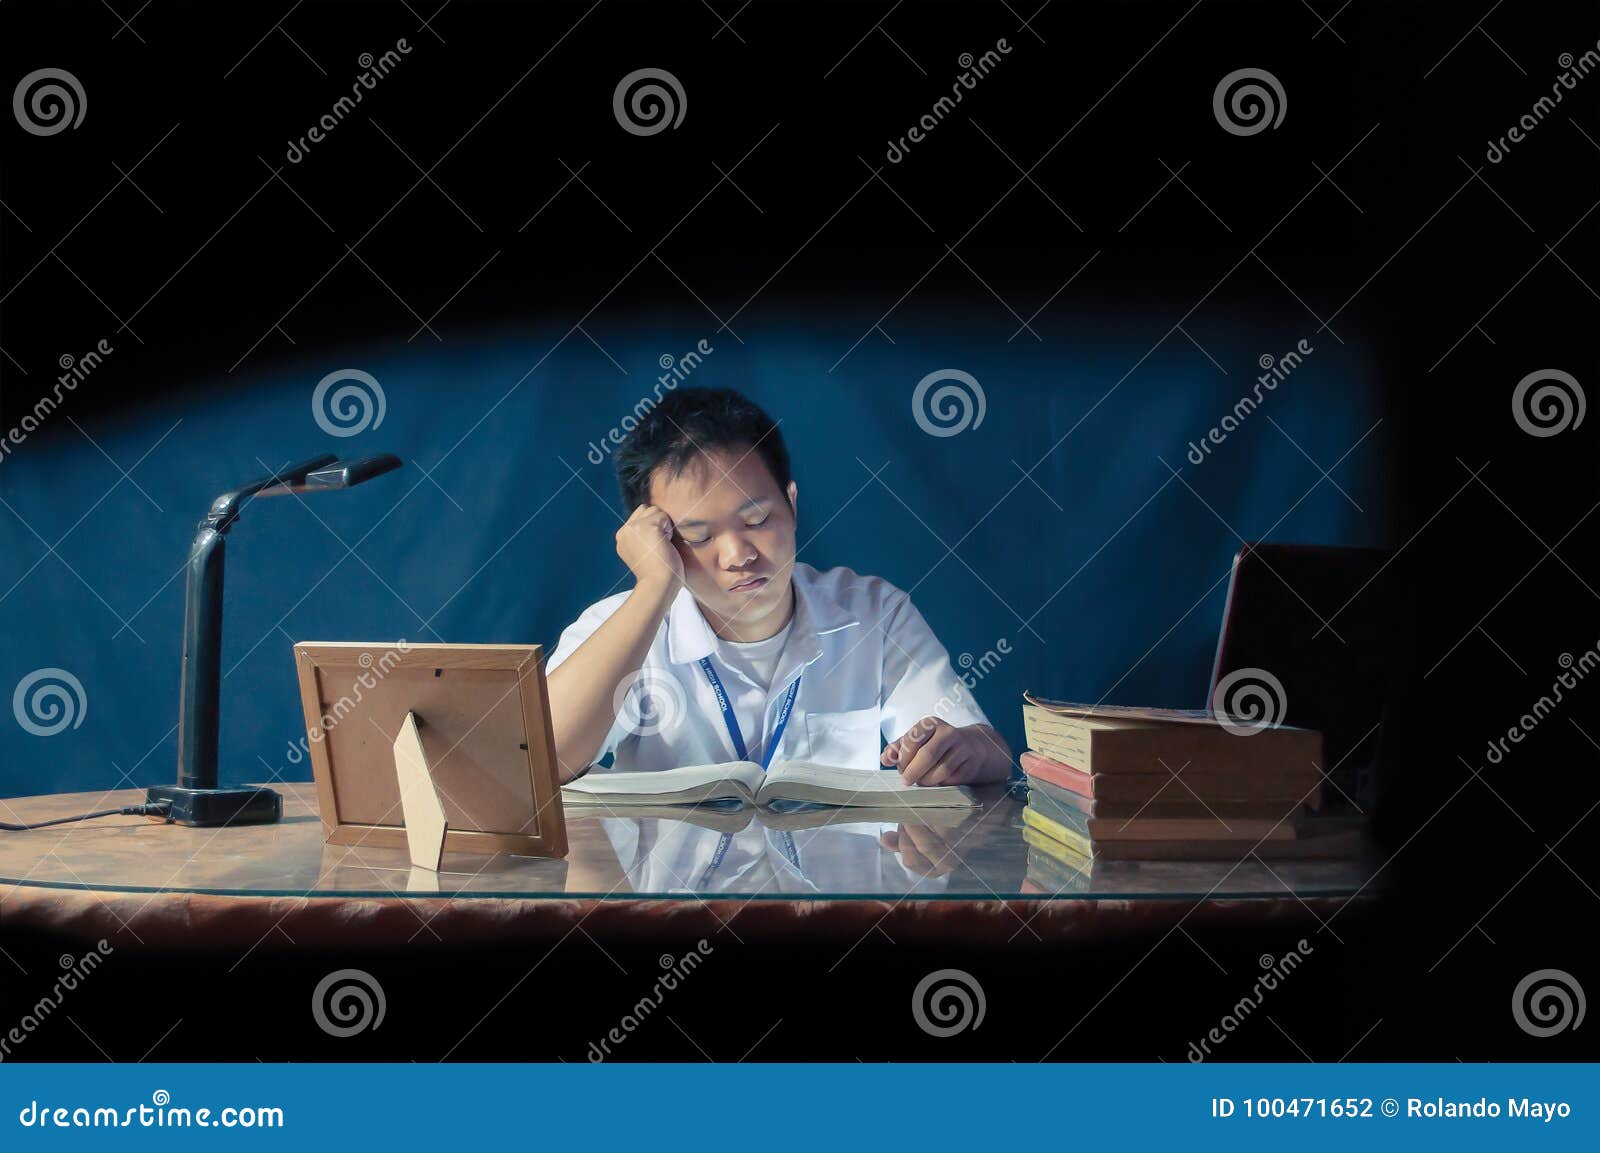 Student Falling Asleep While Studying At A Desk Office Room Shot